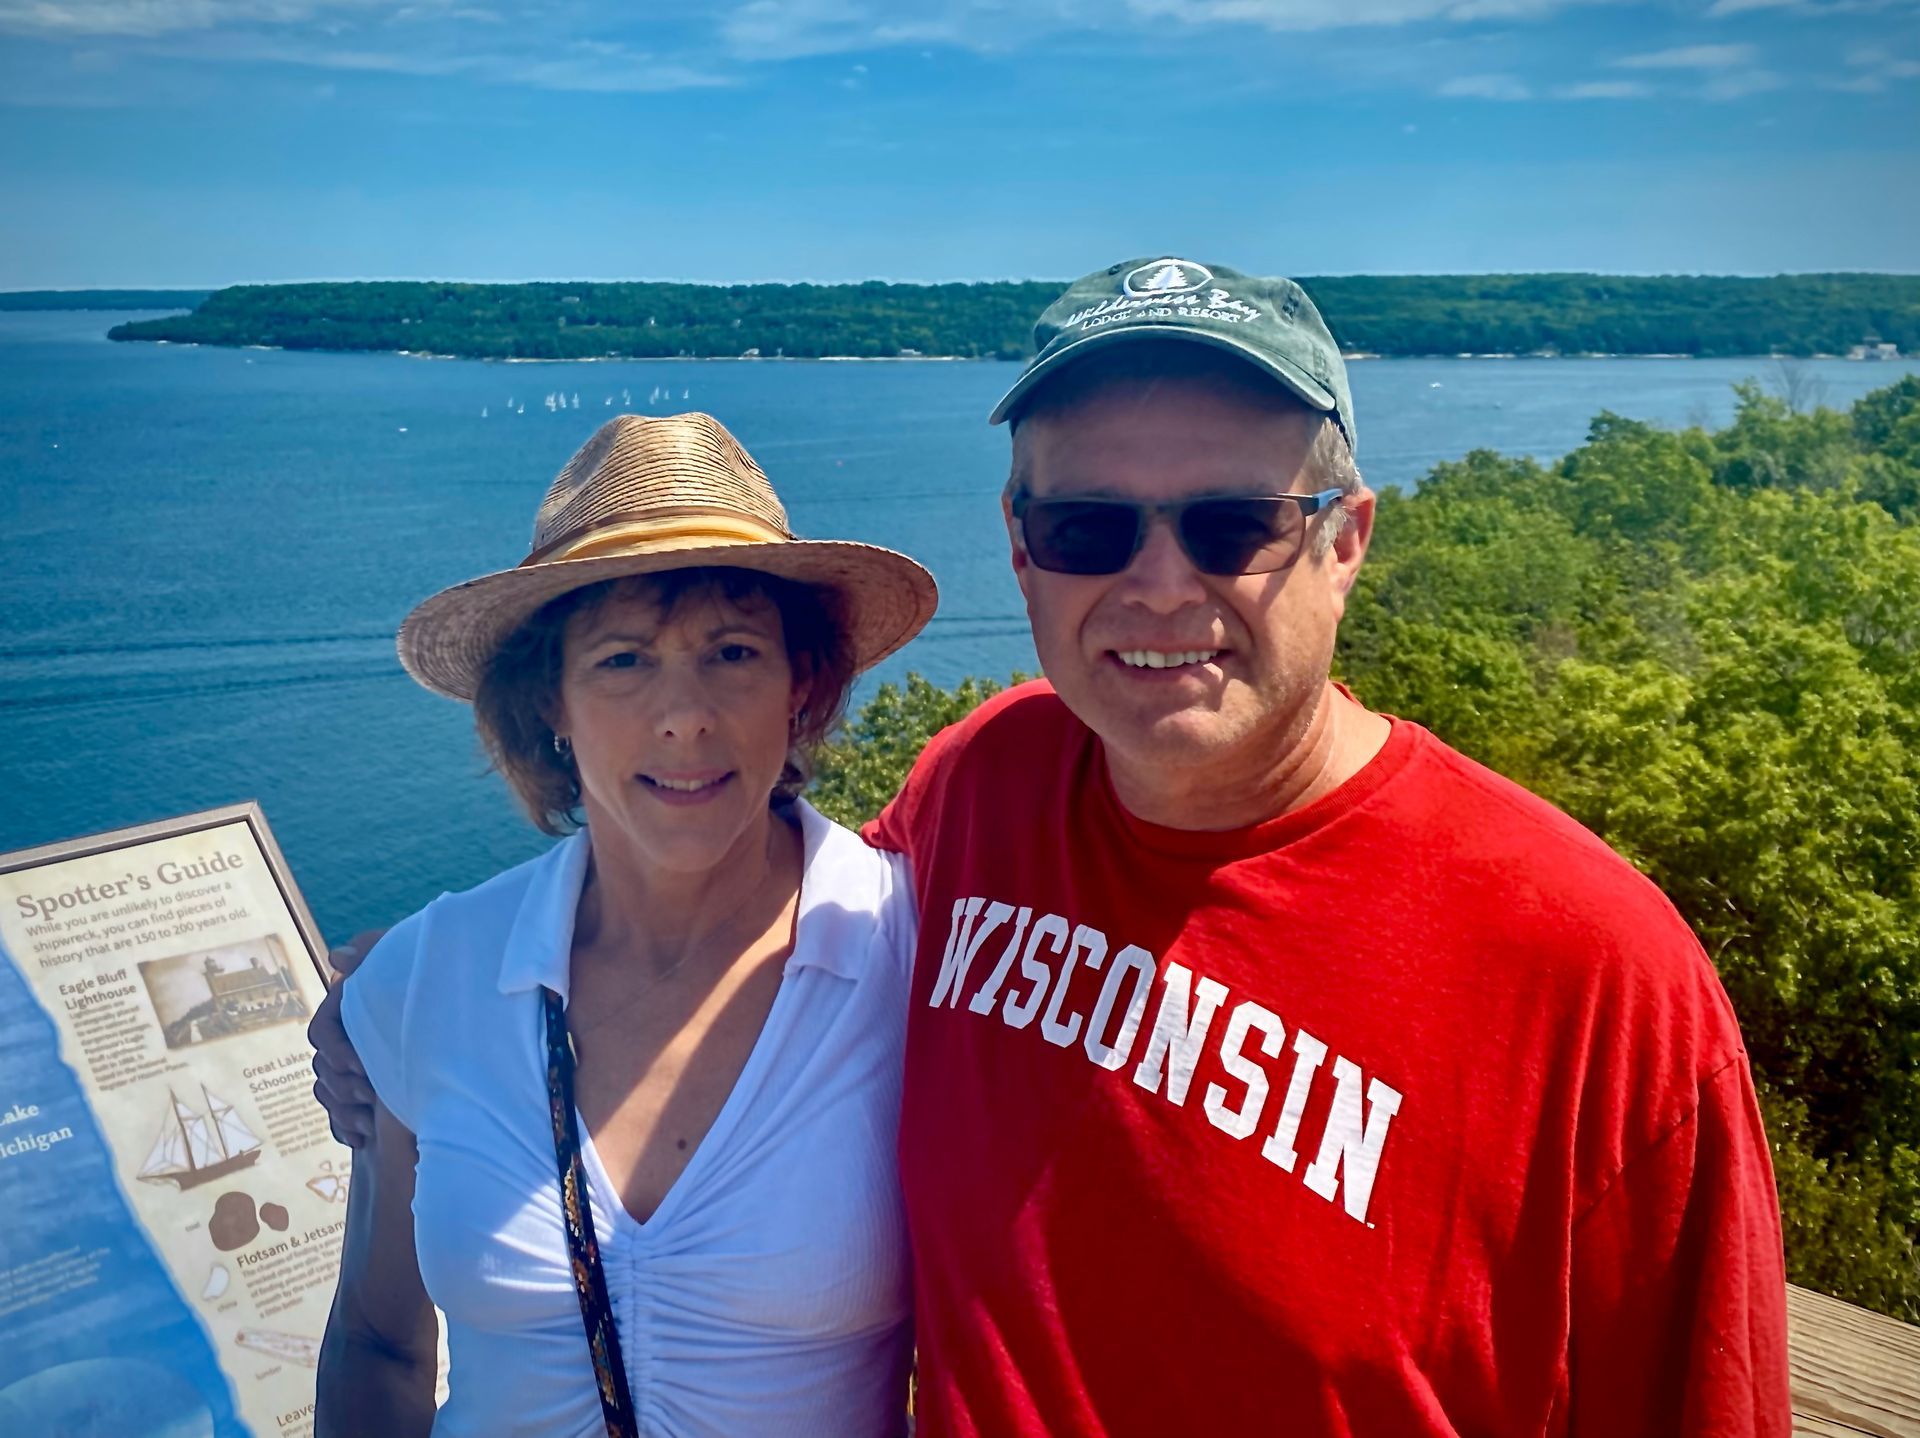 A man in a red wisconsin shirt stands next to a woman in a straw hat.